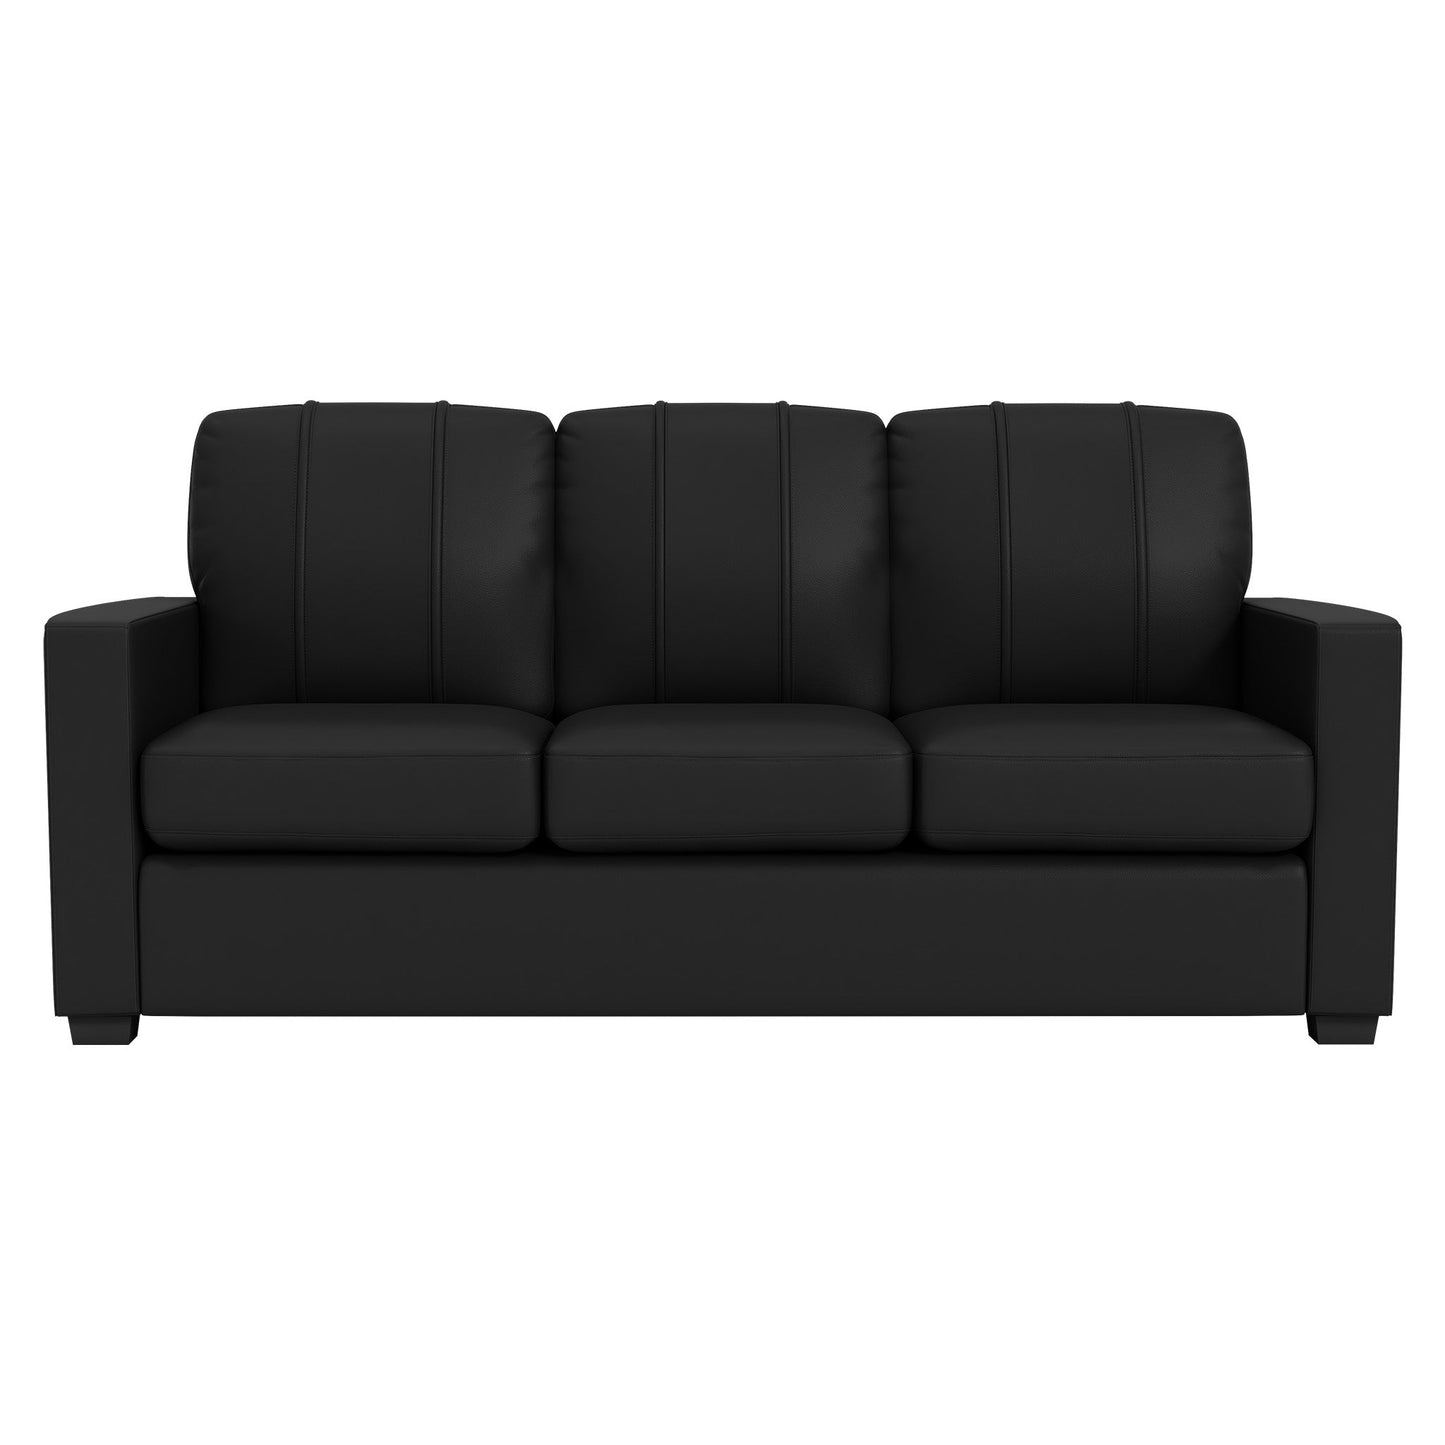 Silver Sofa with New York Mets Secondary